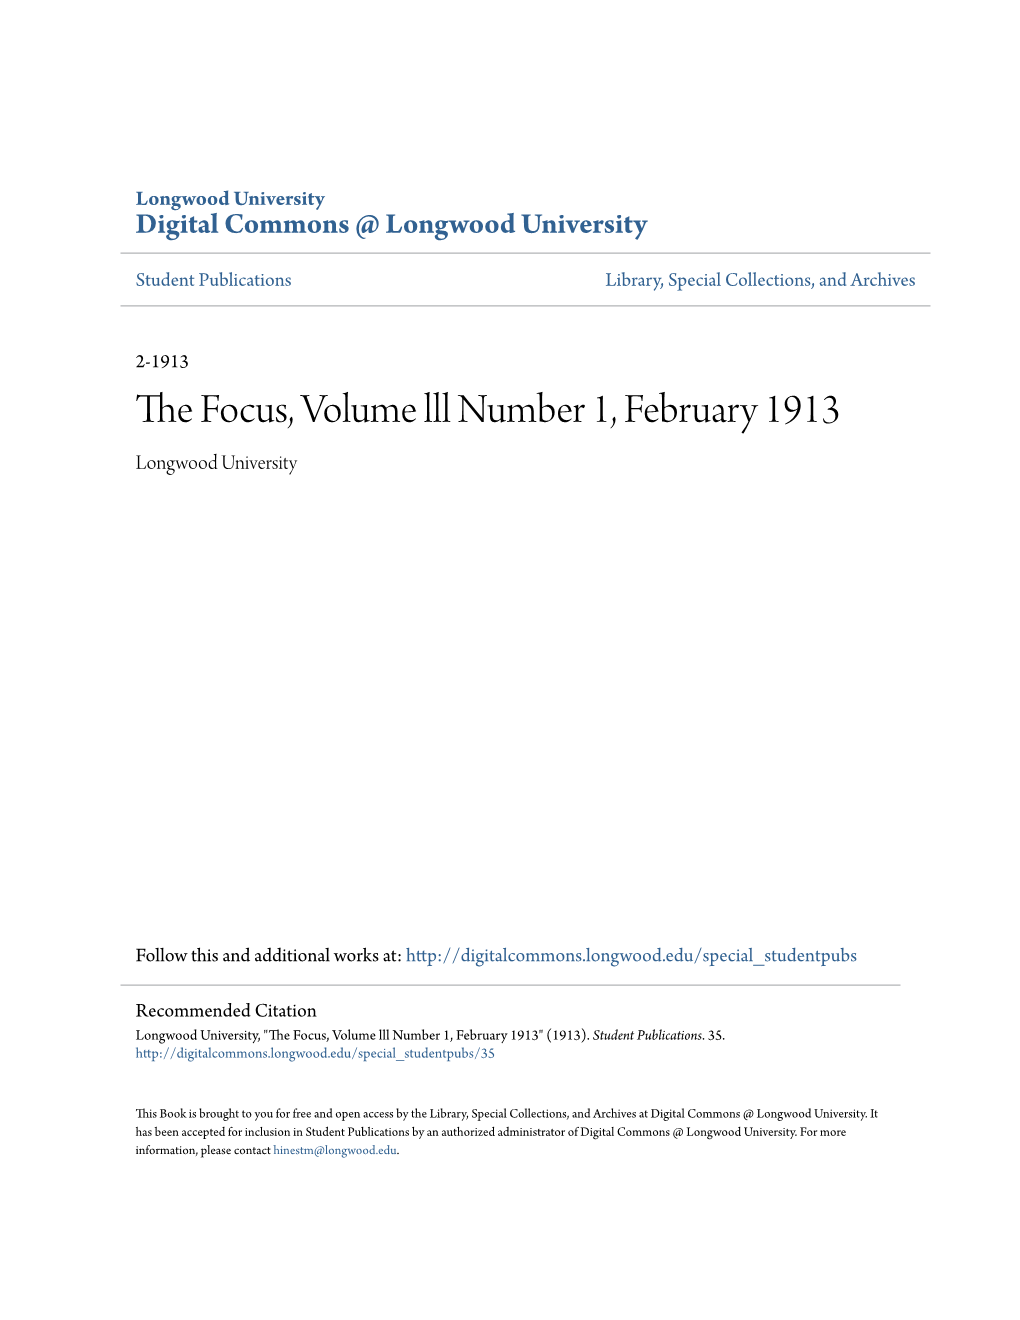 The Focus, Volume Lll Number 1, February 1913